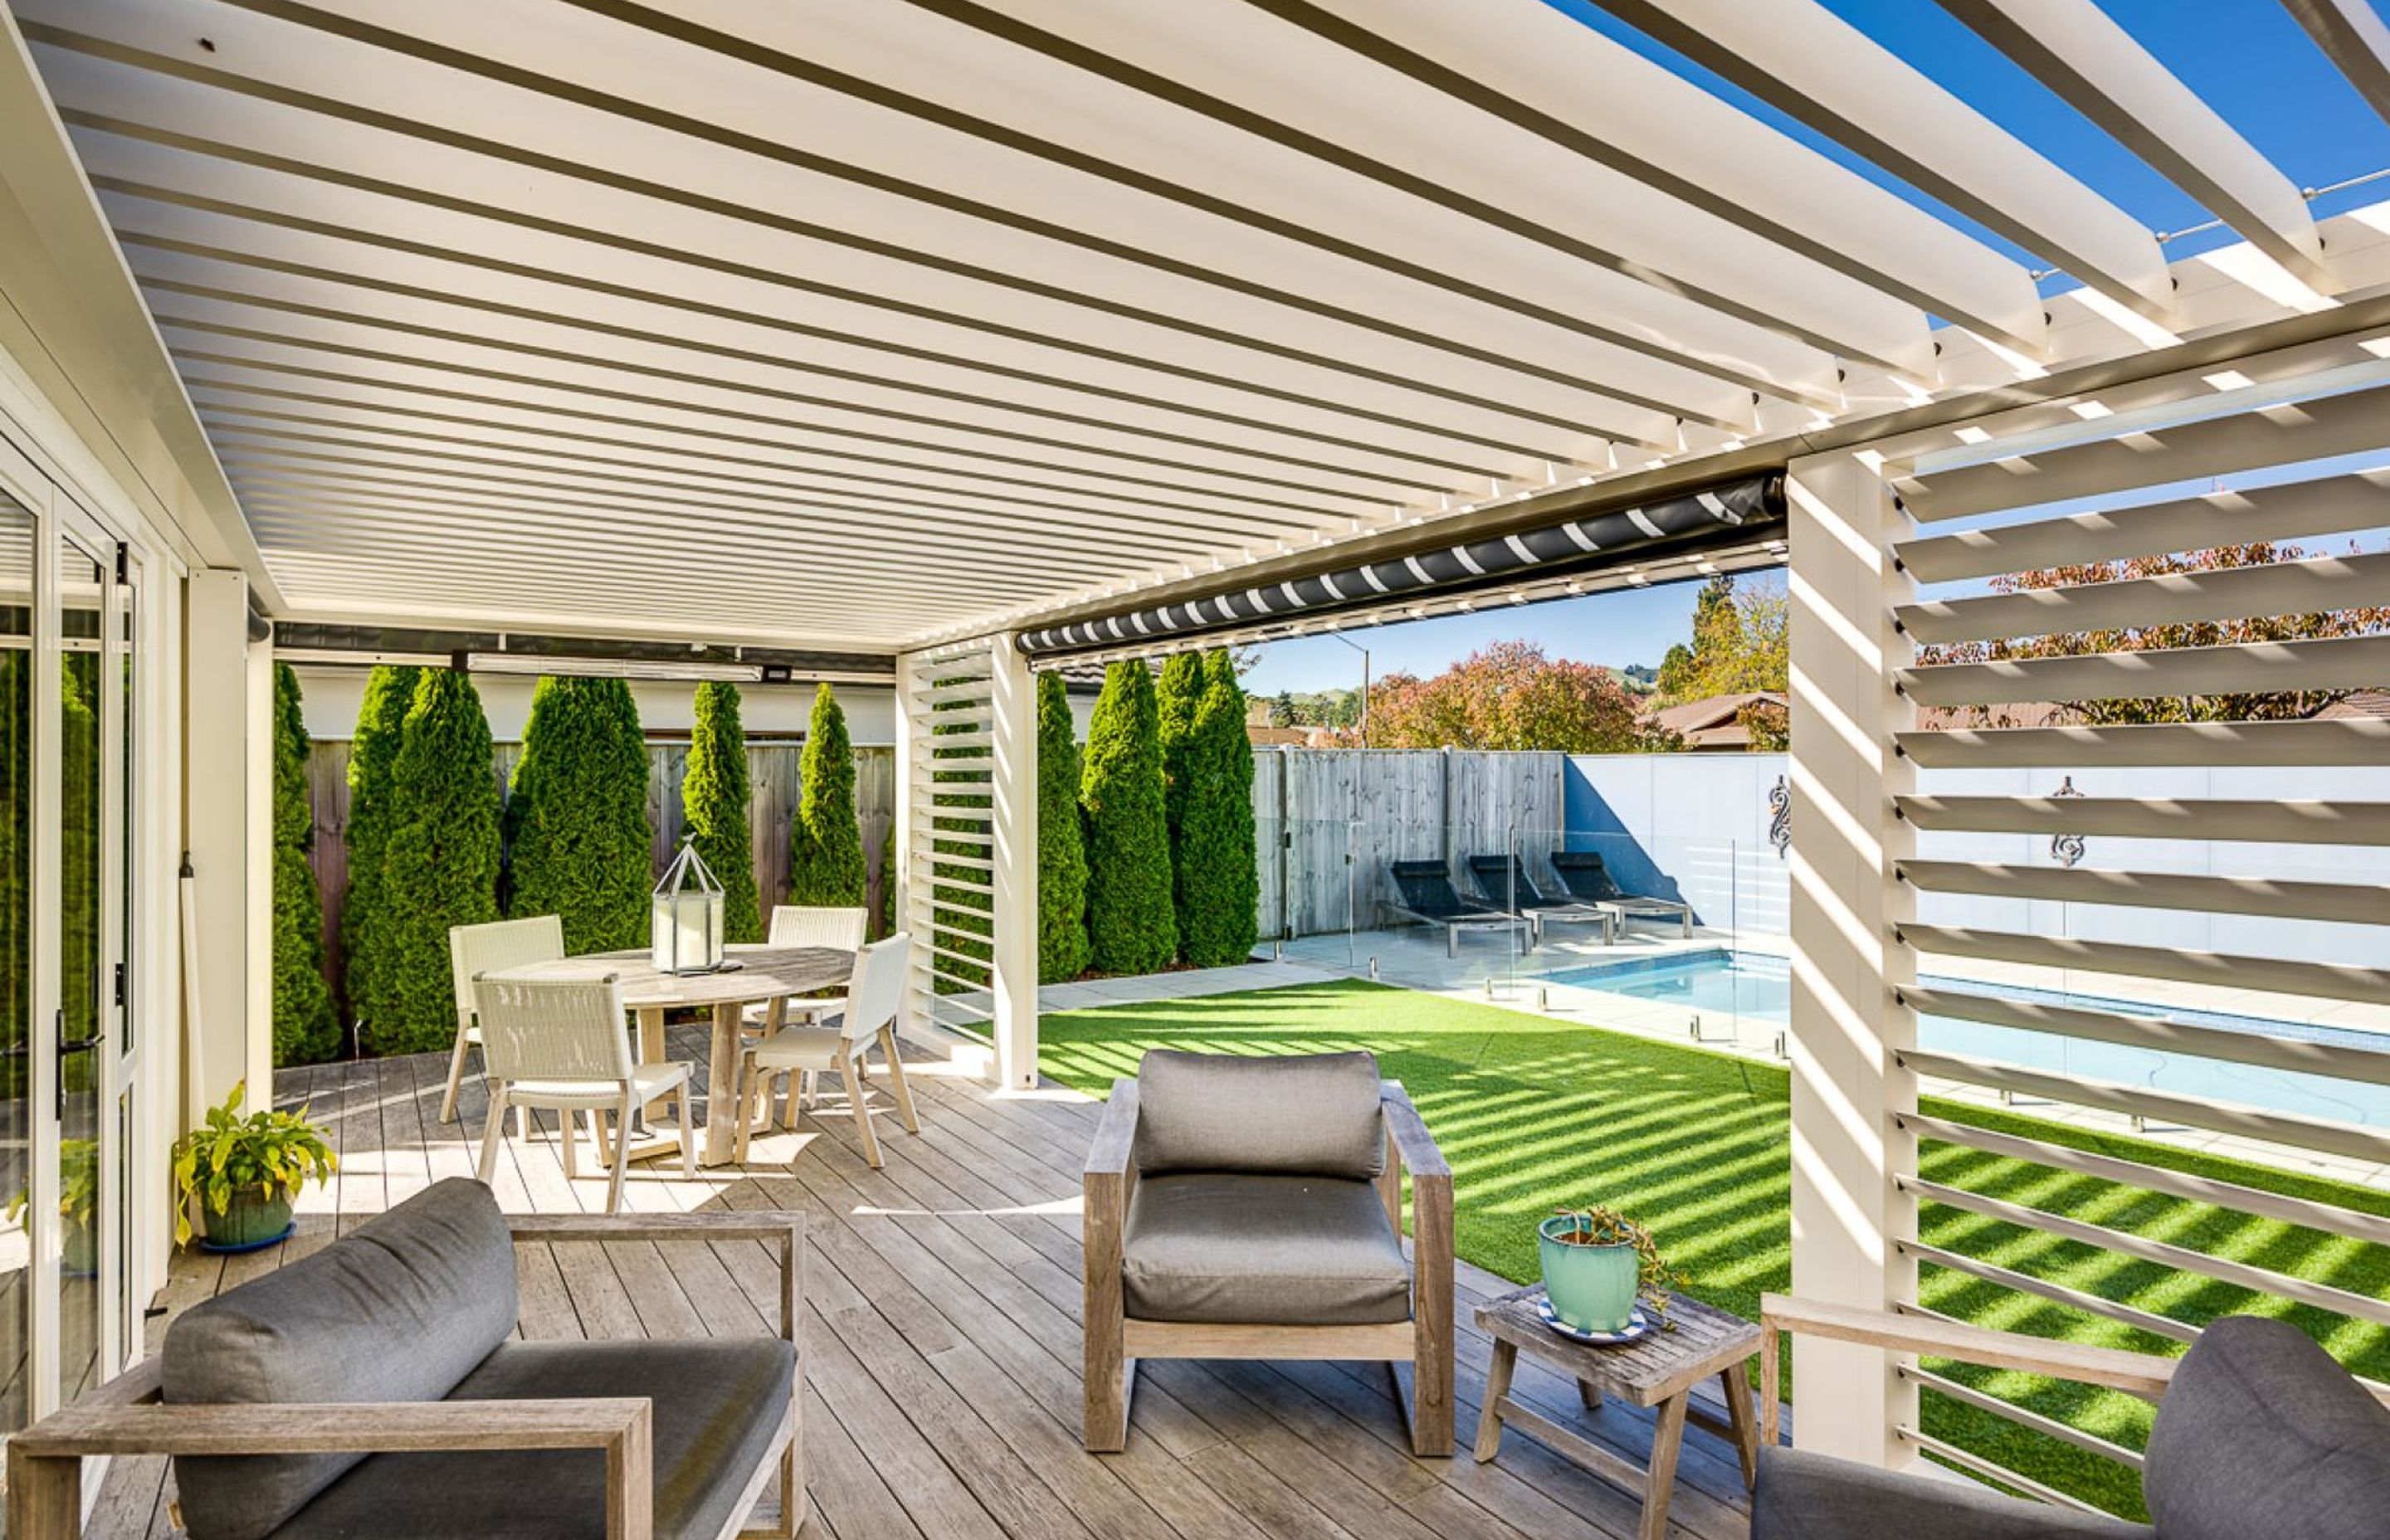 In this Hawke's Bay property, a louvre system uses vertical and horizontal louvres along with blinds to create a complete outdoor room.